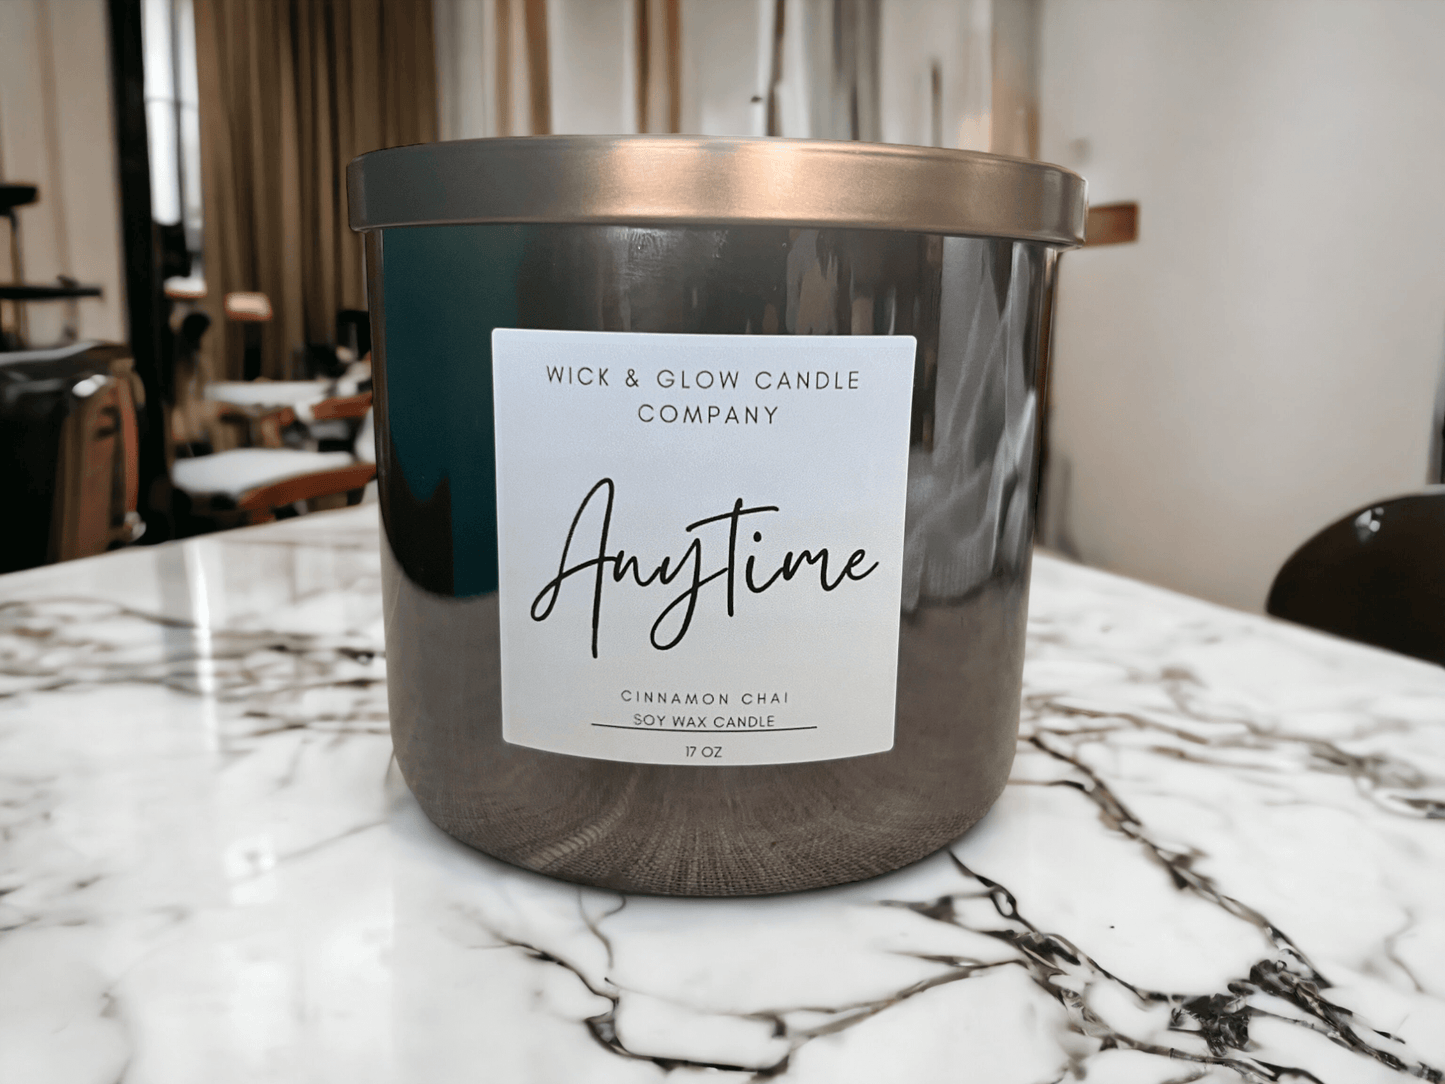 Anytime Cinnamon Chai Scented Soy Wax Candle